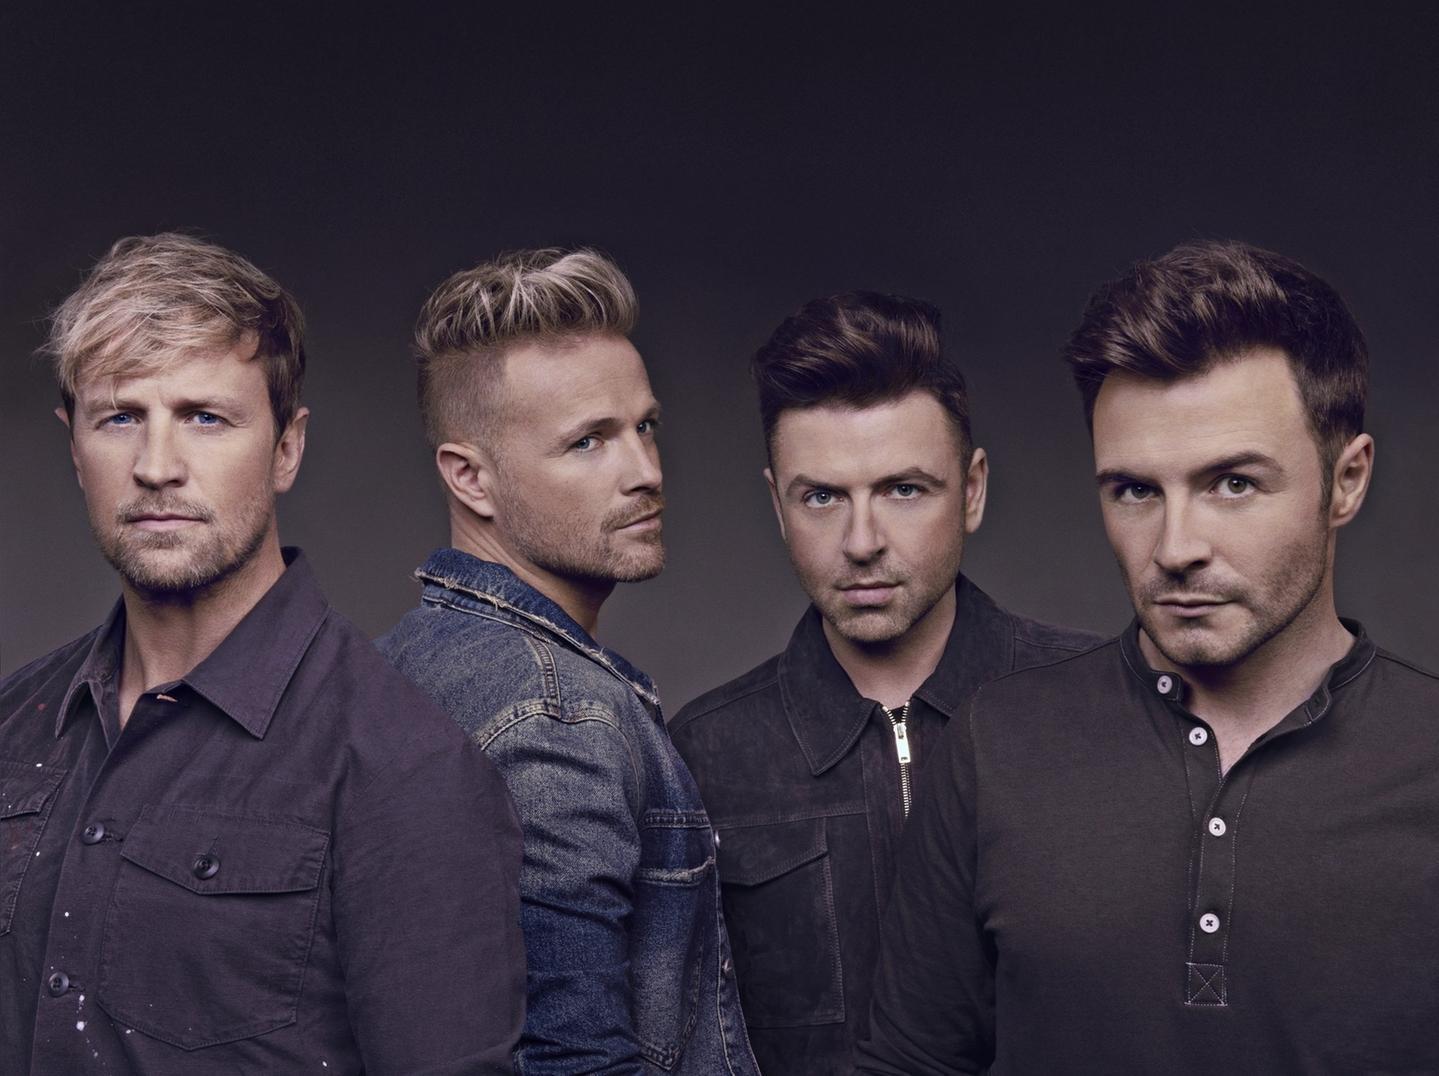 Pop megastars Westlife are bringing their tour to Scarborough on June 17. It is their first time at the Open Air.